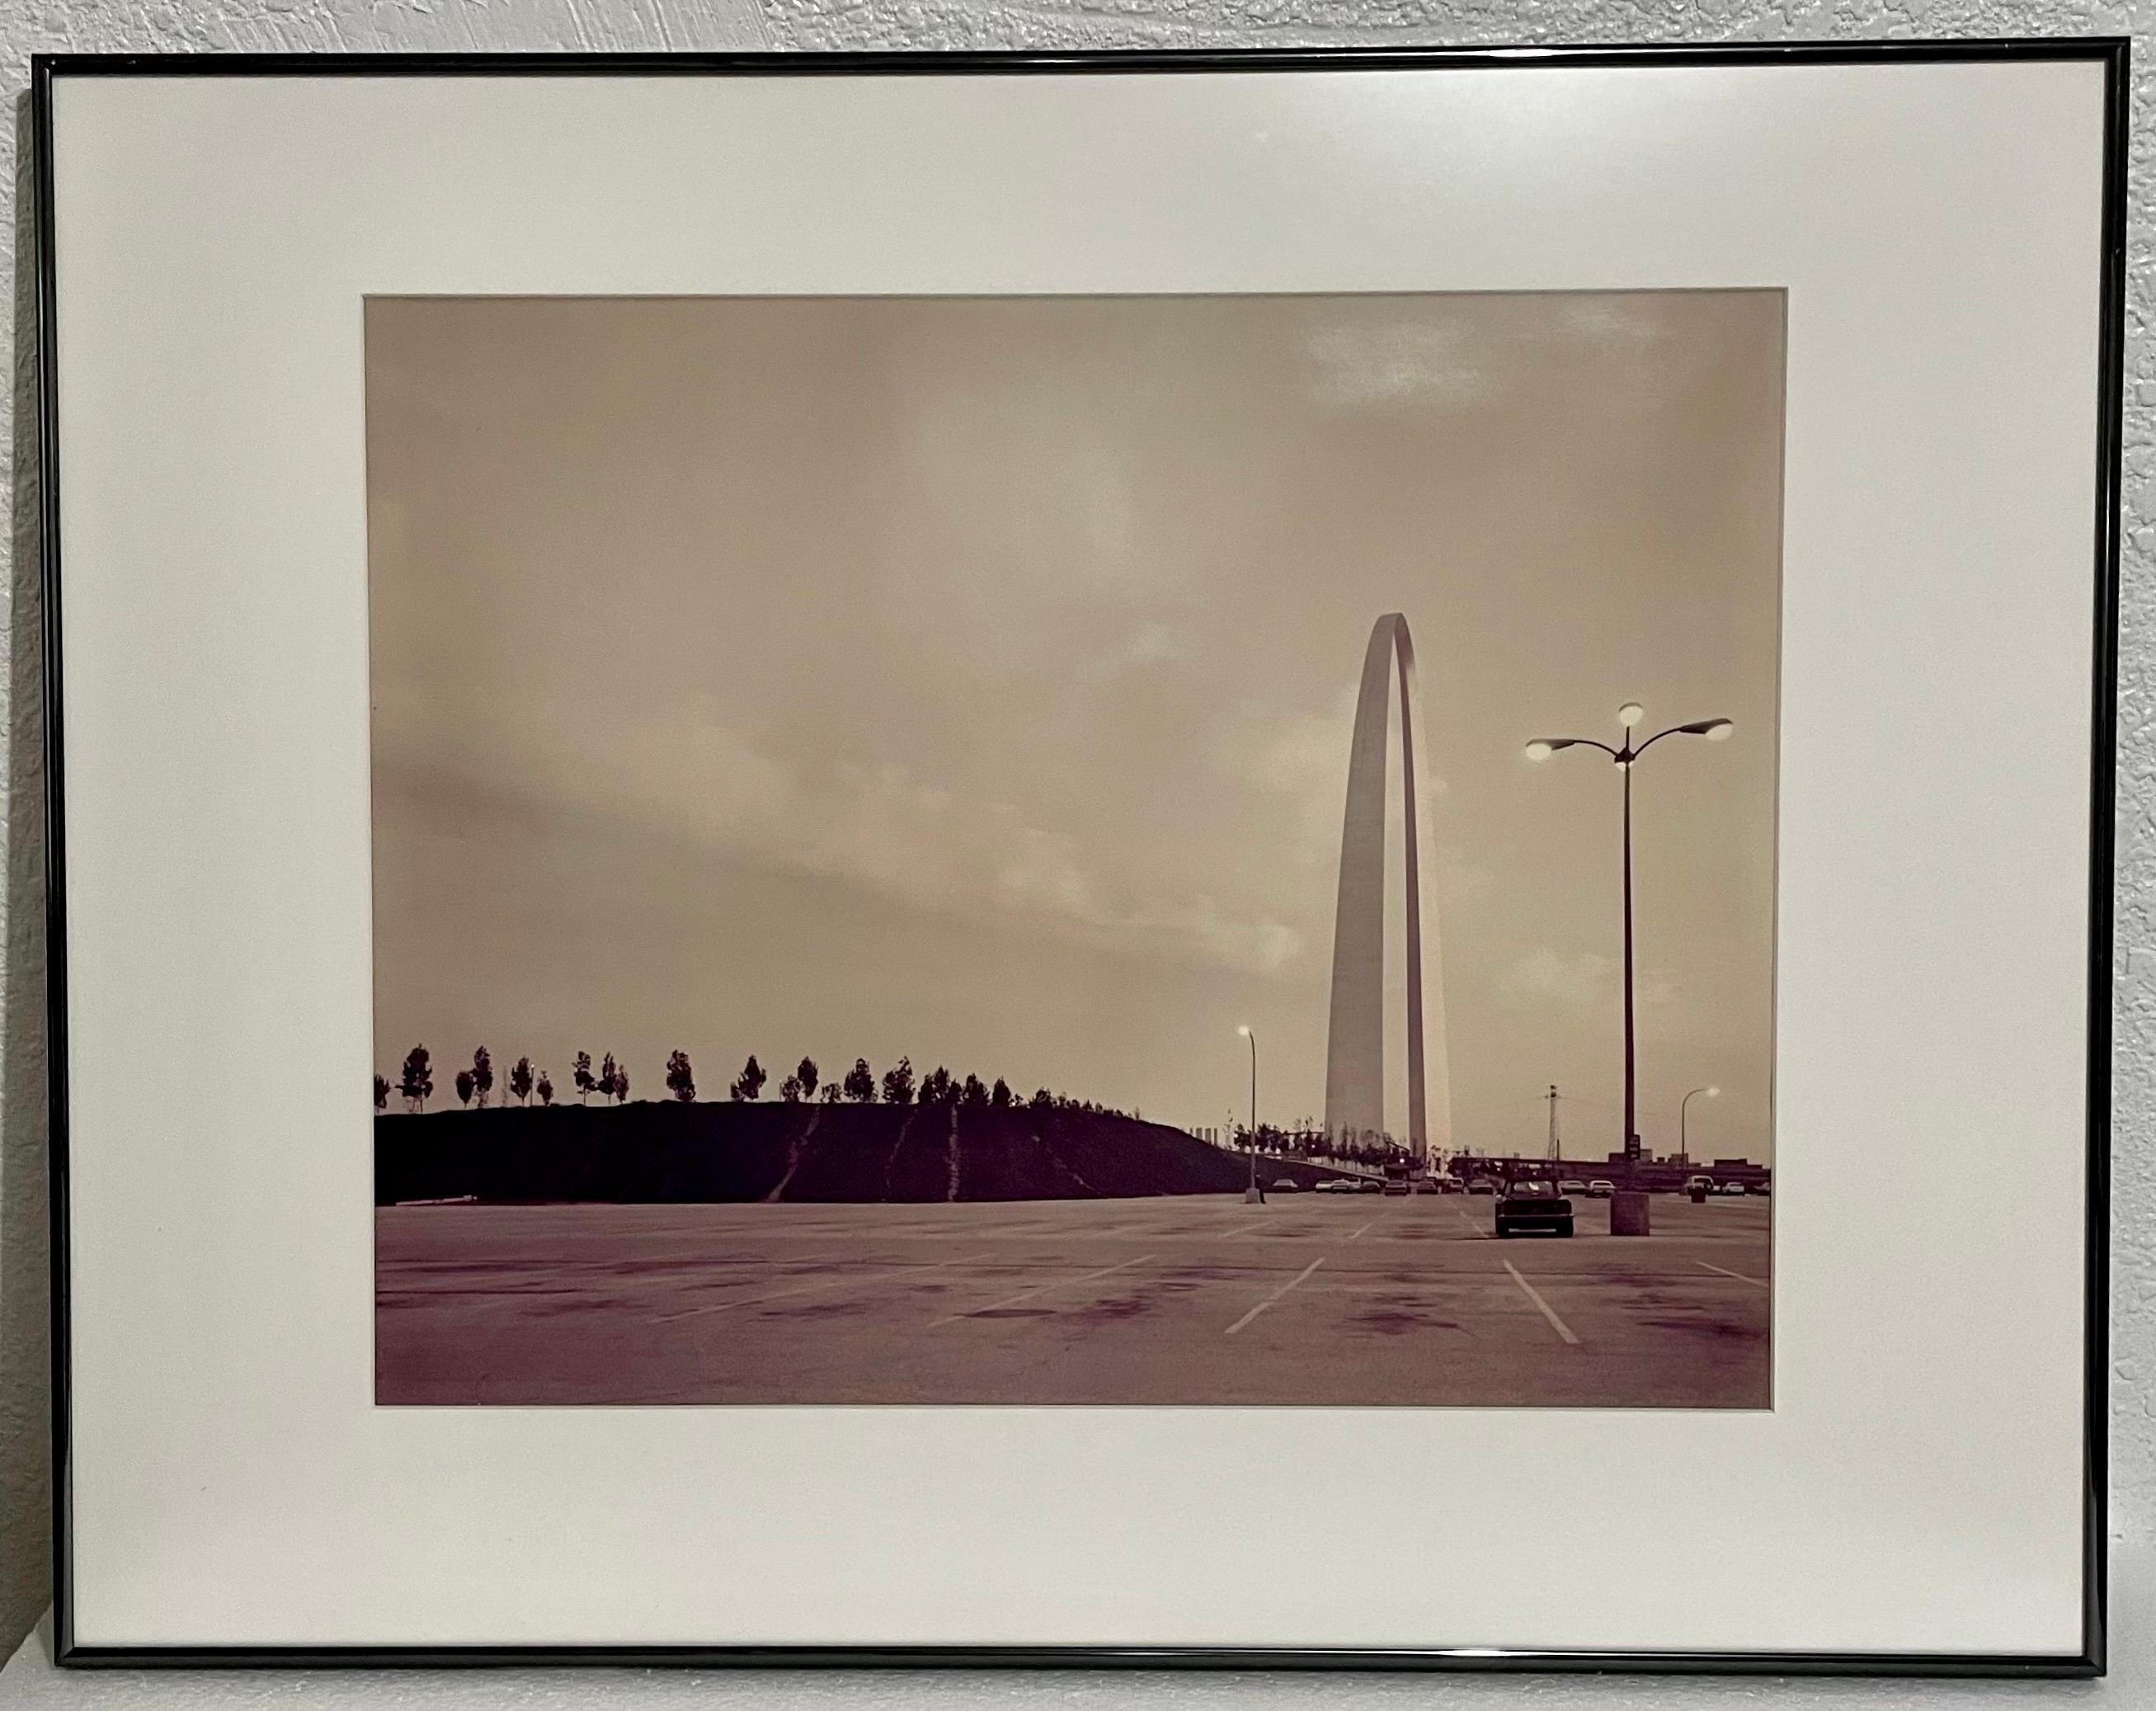 St. Louis and the Arch Vintage Photograph Joel Meyerowitz Architectural Photo 1